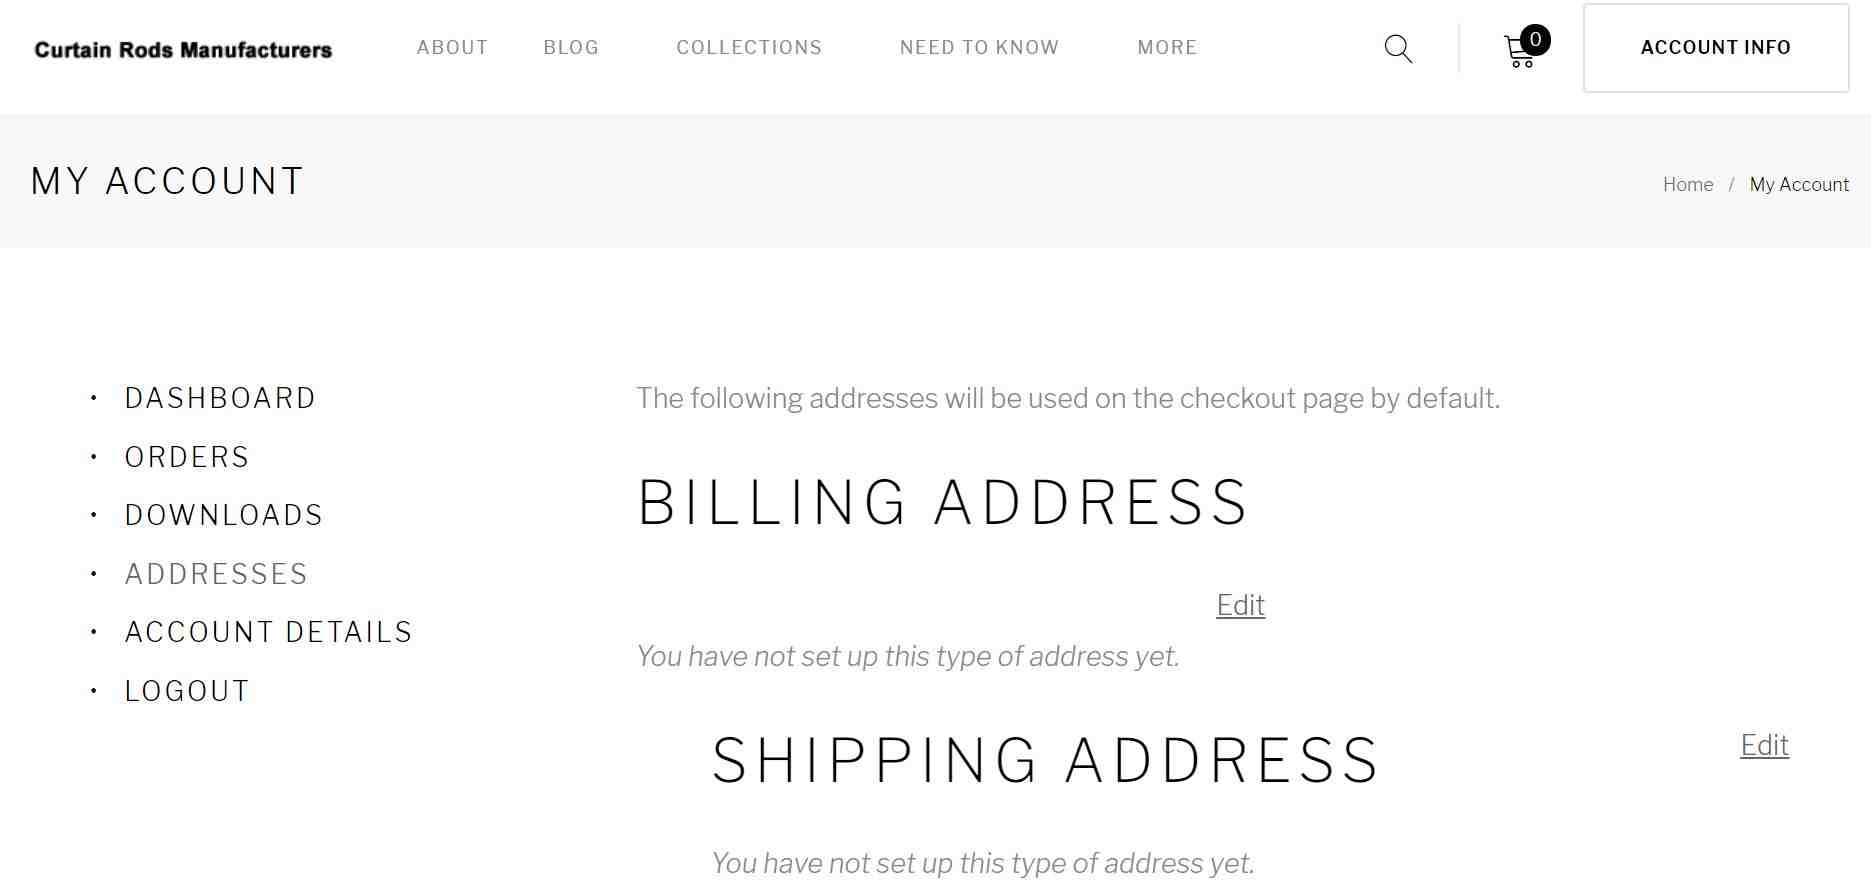 Please provide your Billing address and Shipping address both.